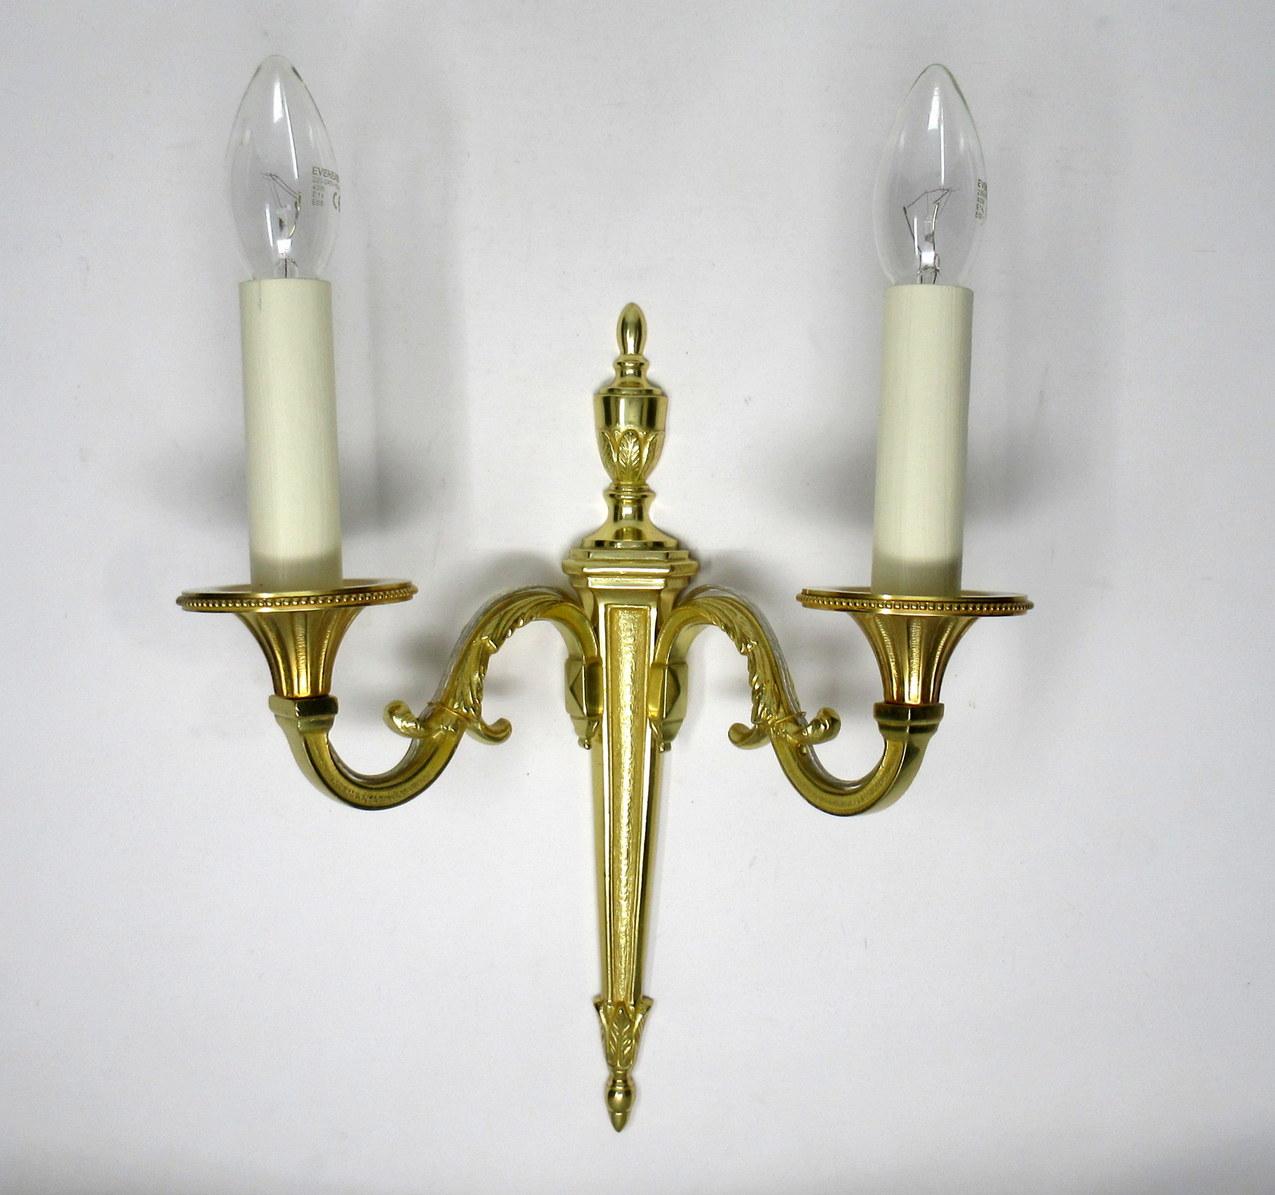 Fine quality pair of English gilt bronze twin arm wall candle sconces lights, of medium proportions, late 19th-early 20th century. 

The twin leaf capped scroll arms issuing from a well-cast single decorative tapering column backplate topped with